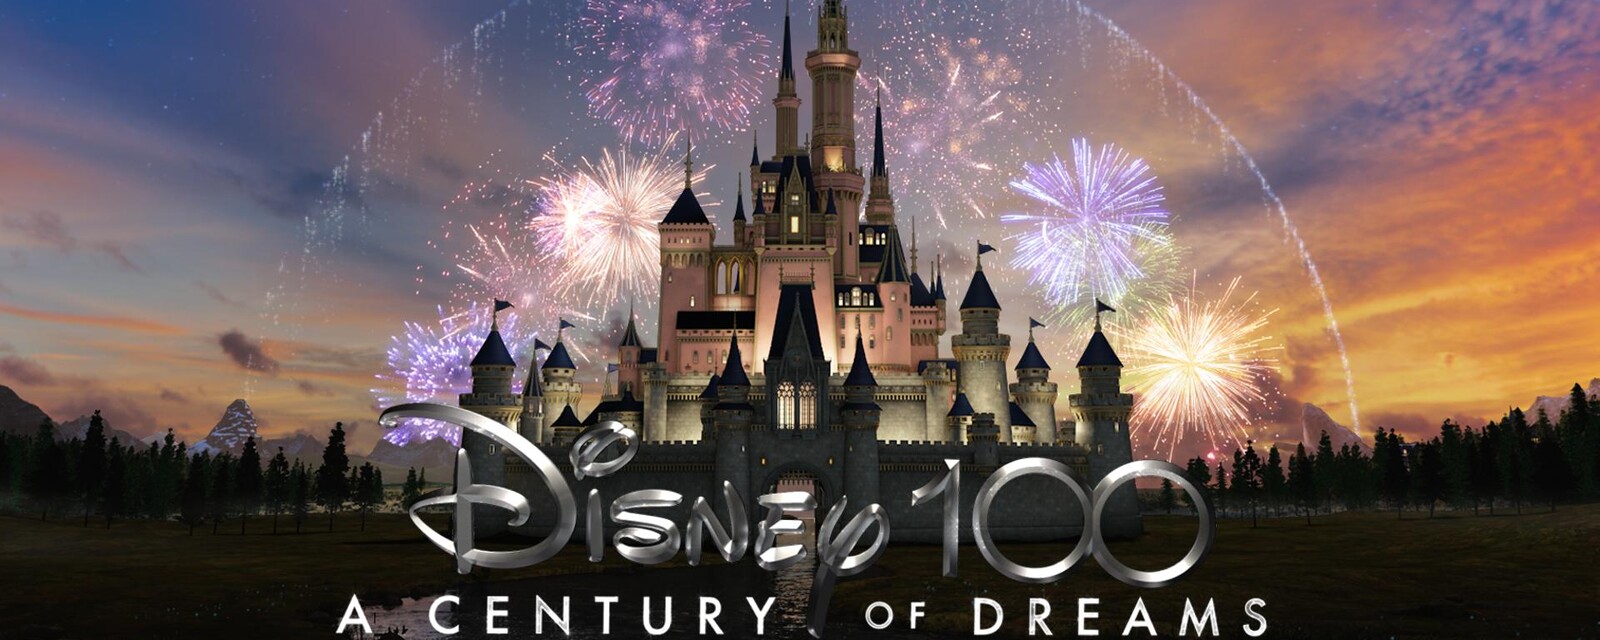 Disney 100 Limited Edition Collection